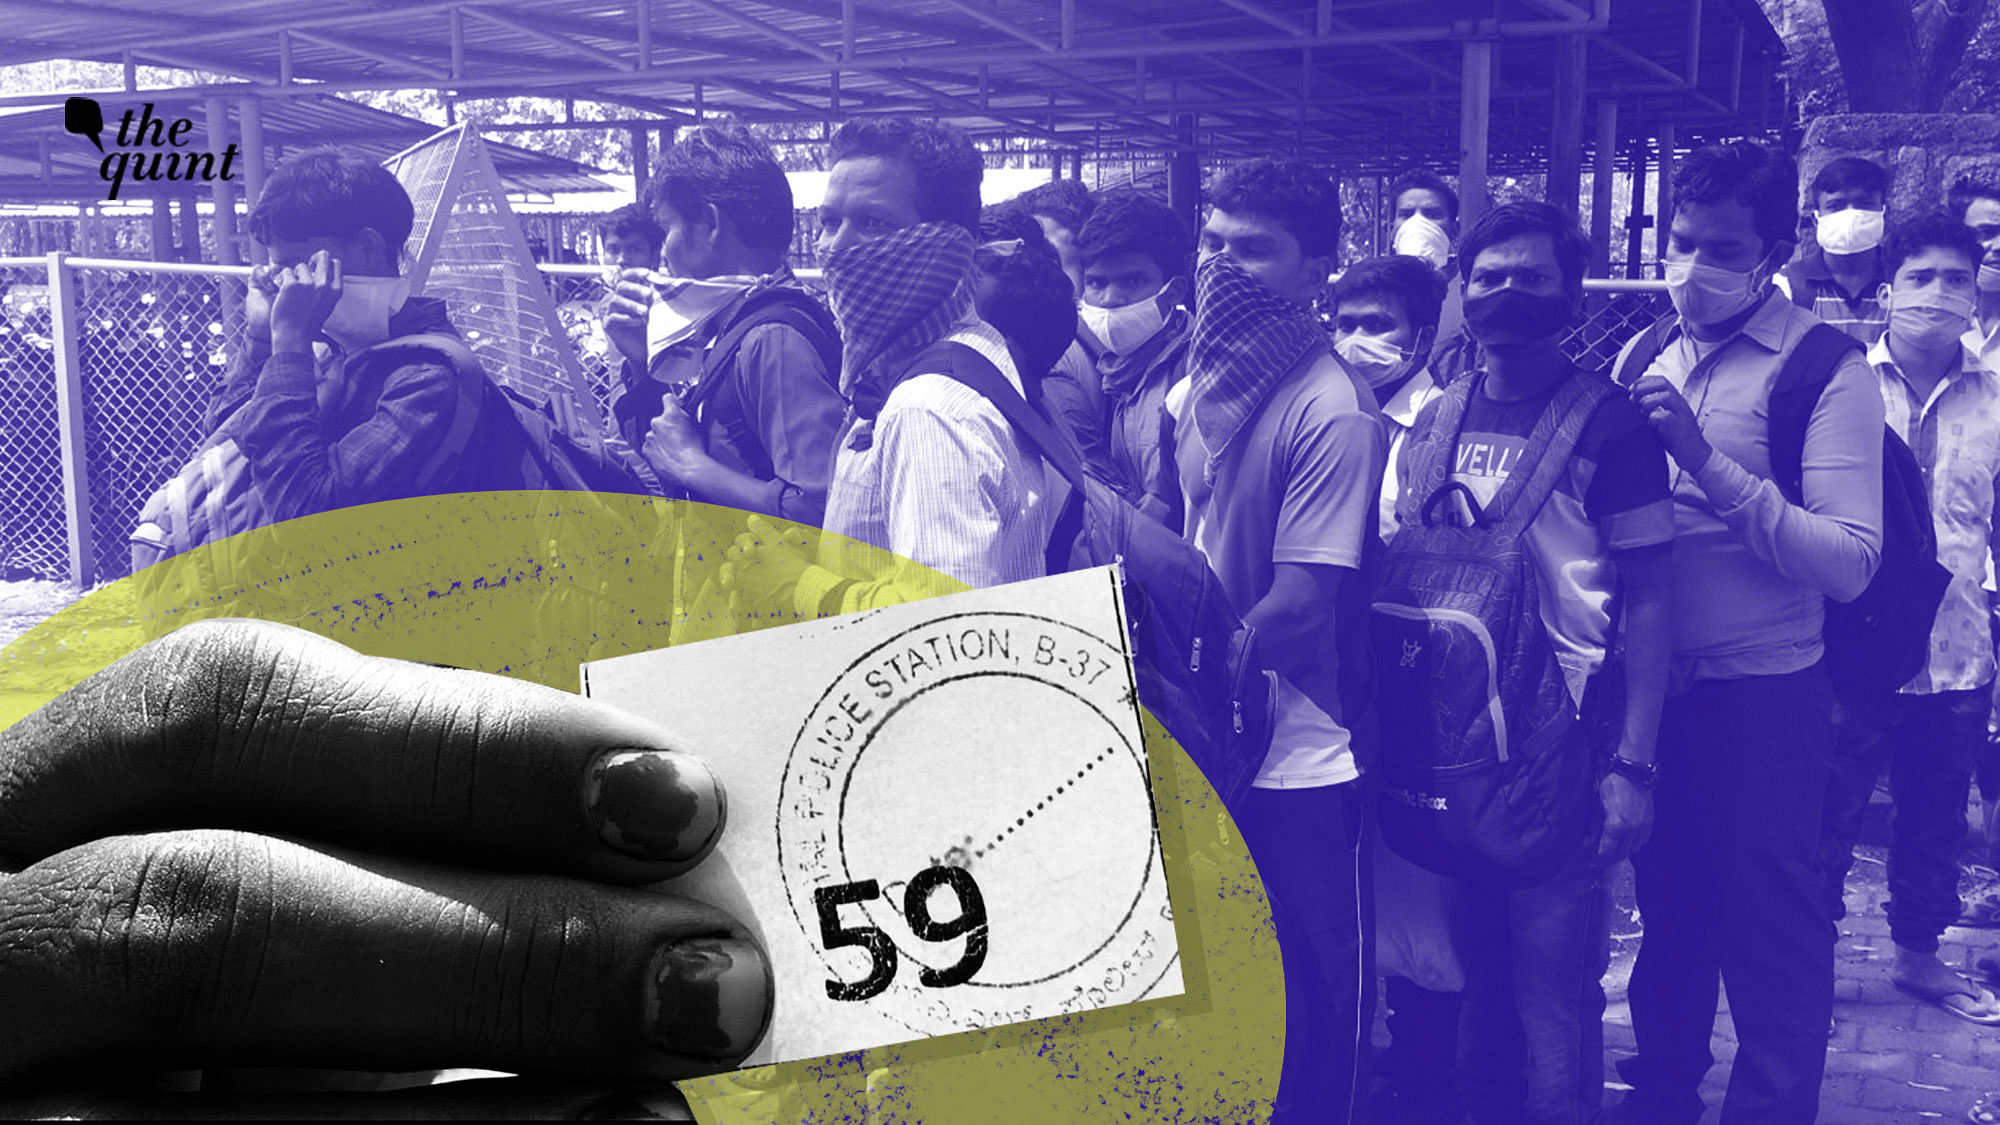 While Shramik trains from Karnataka may have restarted, not everyone is able to get a ticket aboard. Migrants workers in Bengaluru are crowding at police stations, desperate and clueless about the process, and often sleeping on the roads. &nbsp;